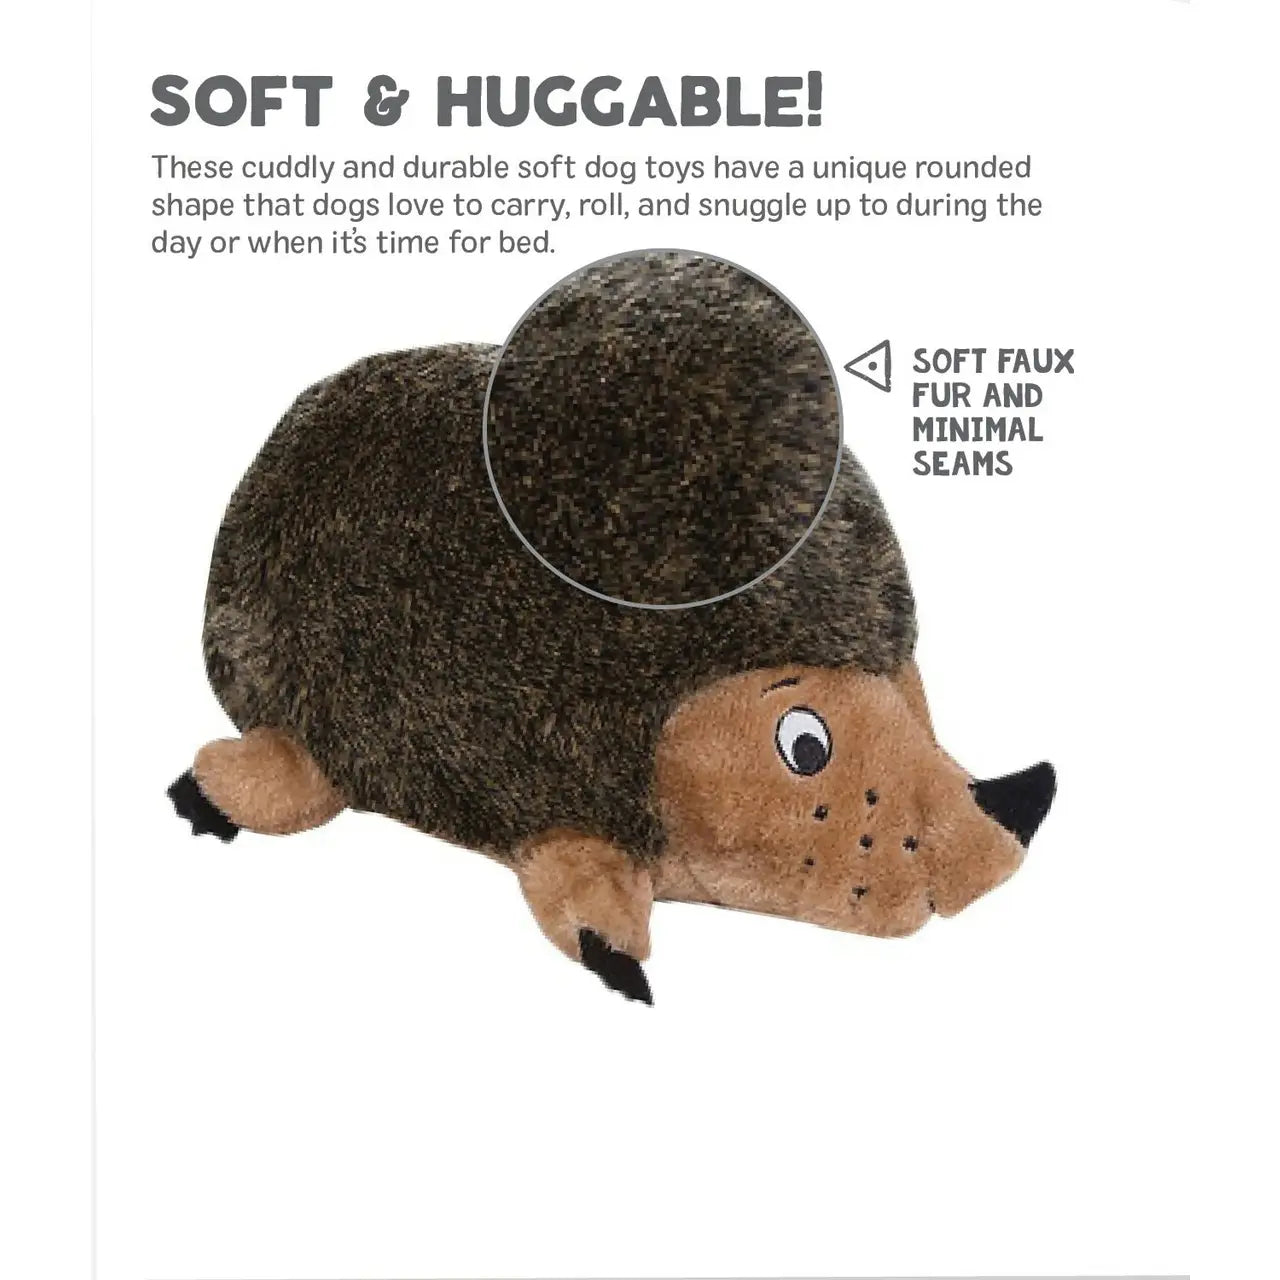 Soft & Huggable! These cuddly and durable soft dog toys have a unique rounded shape that dogs love to carry, roll, and snuggle up to during the day or when it's time for bed. SOFT FAUX FUR AND MINIMAL SEAMS